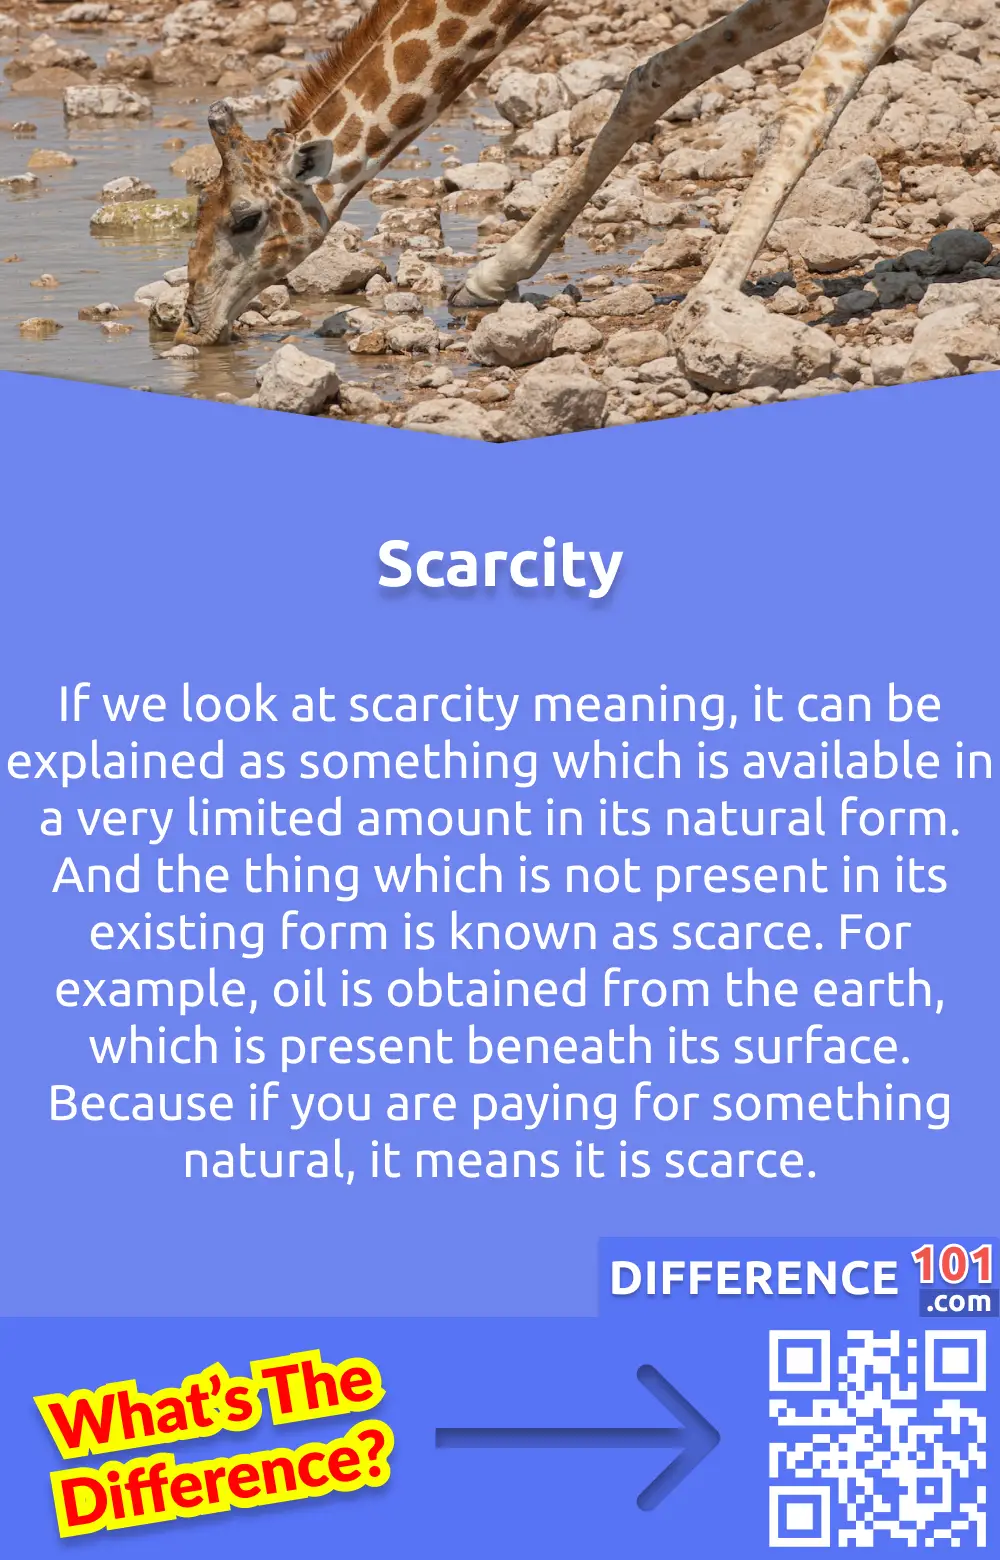 What is Scarcity? If we look at scarcity meaning, it can be explained as something which is available in a very limited amount in its natural form. And the thing which is not present in its existing form is known as scarce. For example, oil is obtained from the earth, which is present beneath its surface. Oil companies worldwide spend tons of money to extract that oil from the earth in its possible shape. Once they obtained it, they sold it to other local companies, and then those companies sold it to the consumers. This whole process takes a lot of time and various processes, and people have to pay for it. So, oil is scarce. Because if you are paying for something natural, it means it is scarce.
